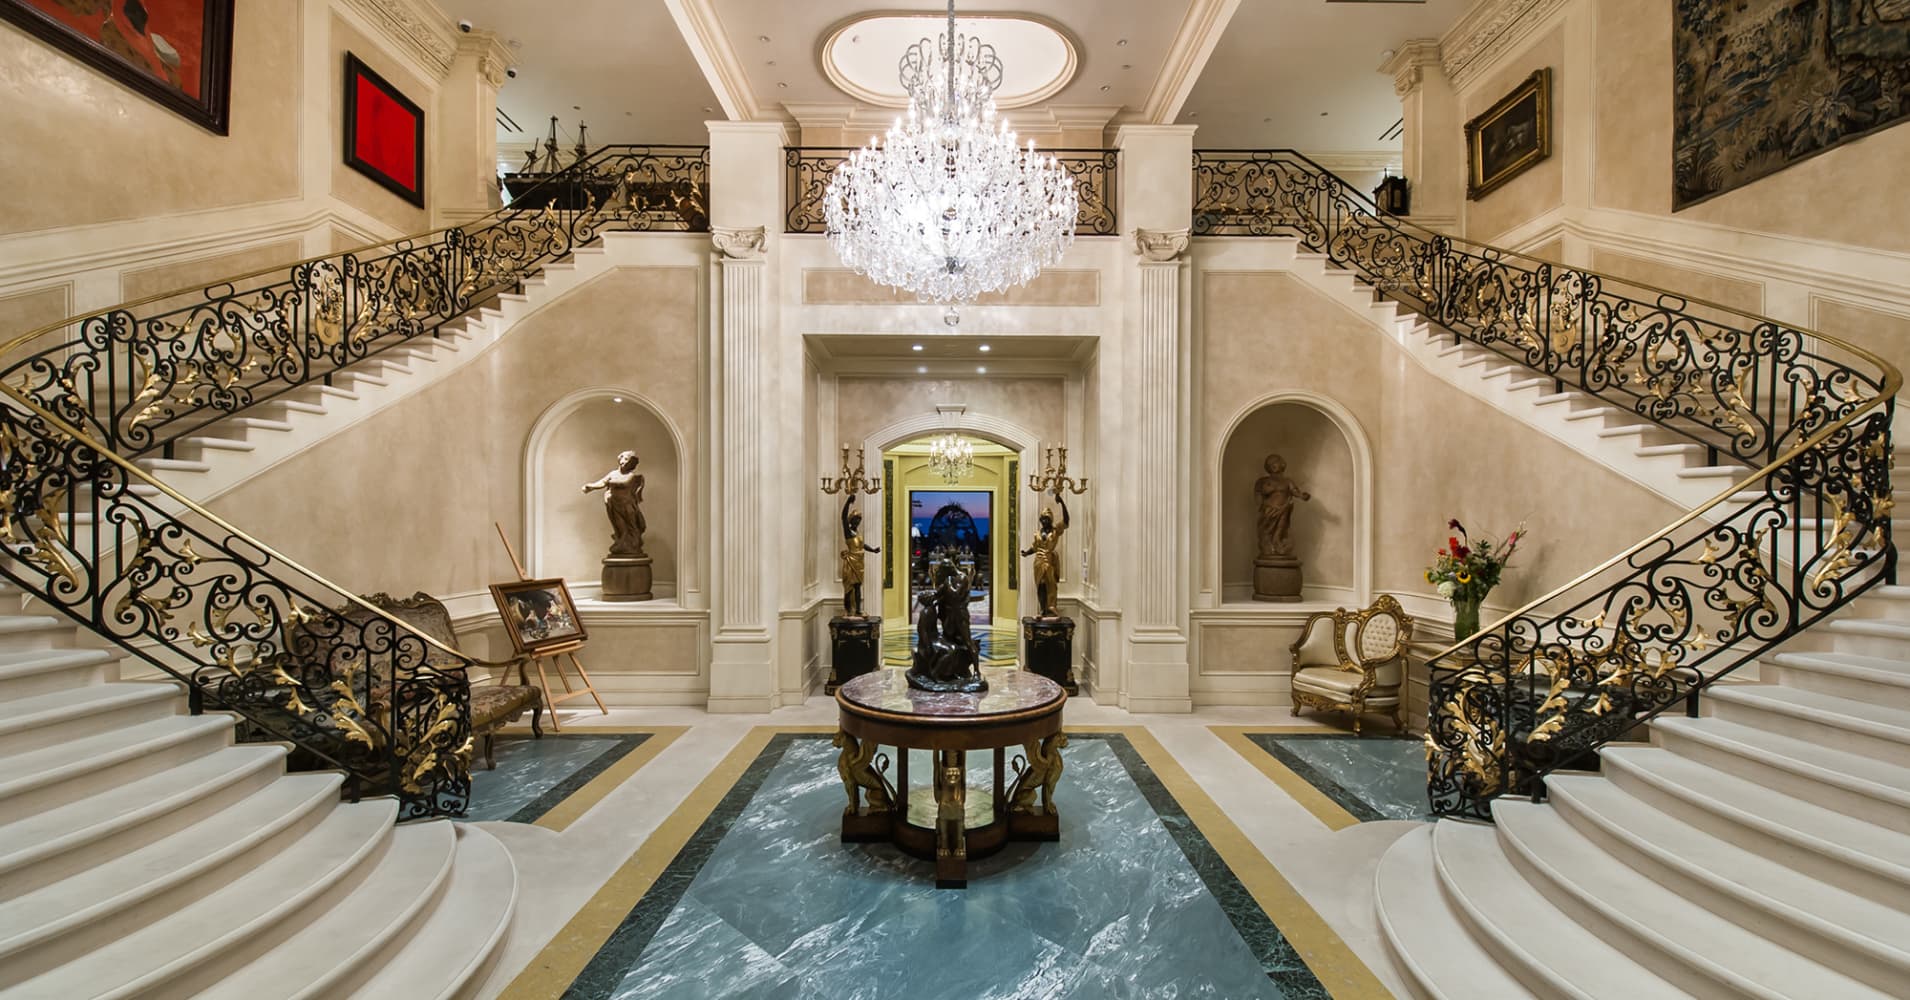 $195M mansion now the most expensive listing